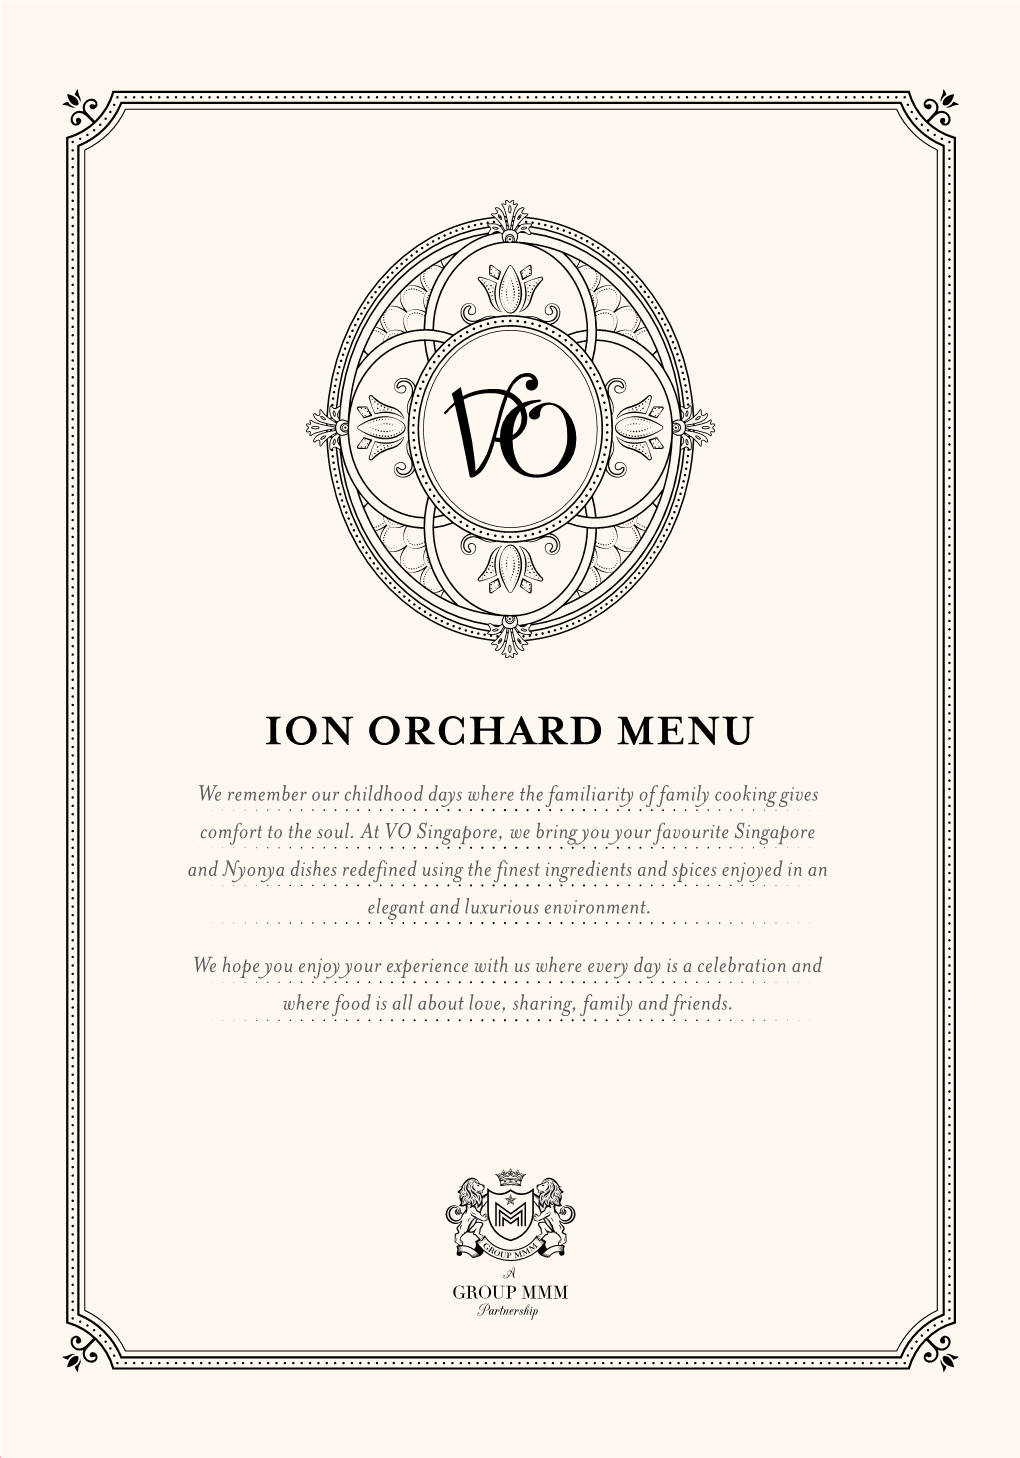 ION ORCHARD MENU We Remember Our Childhood Days Where the Familiarity of Family Cooking Gives Comfort to the Soul